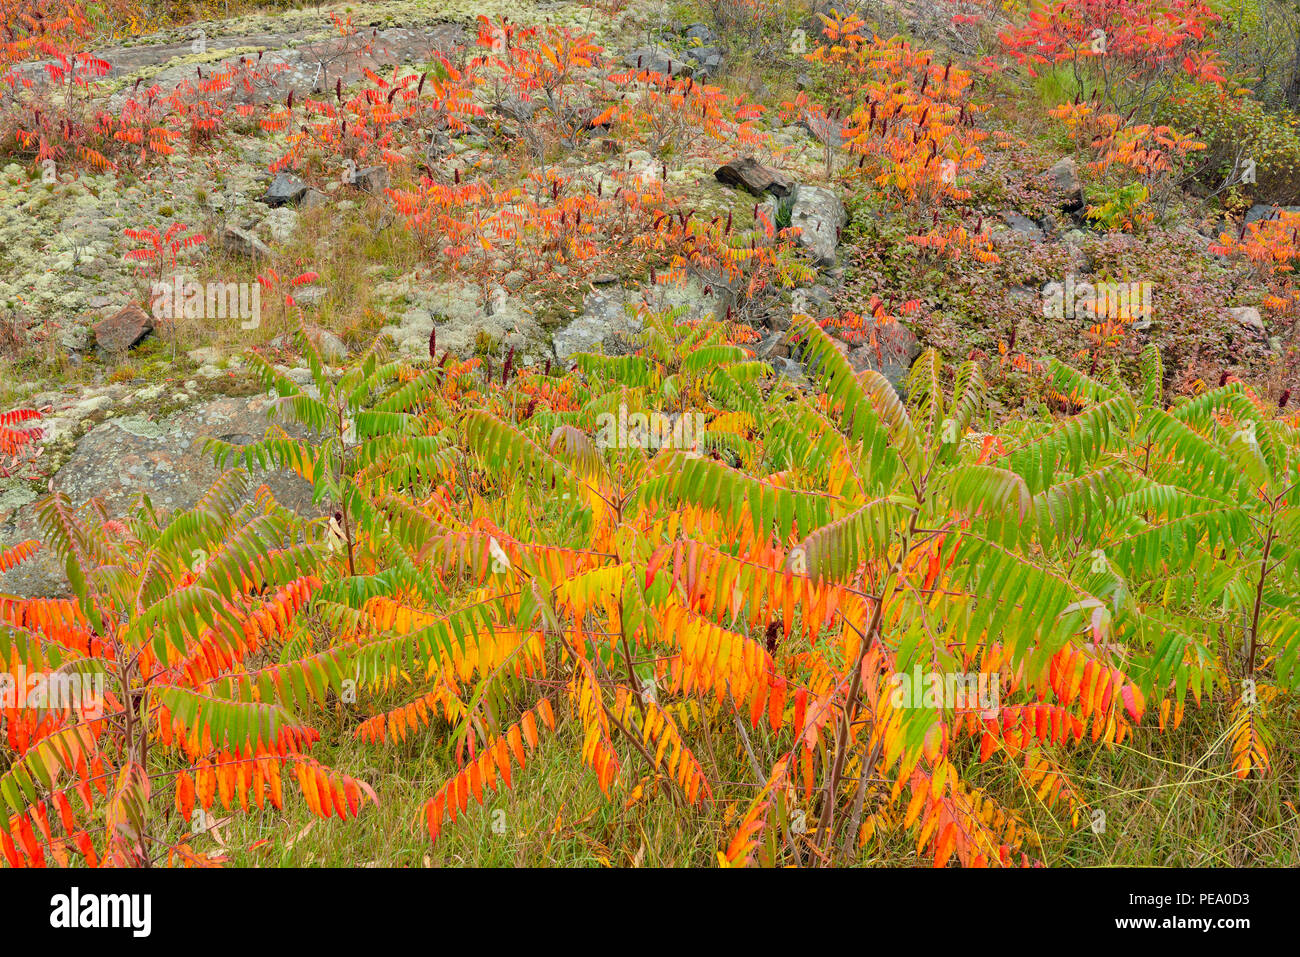 Rock outcrop with autumn staghorn sumac (Rhus typhina), French River, Ontario, Canada Stock Photo